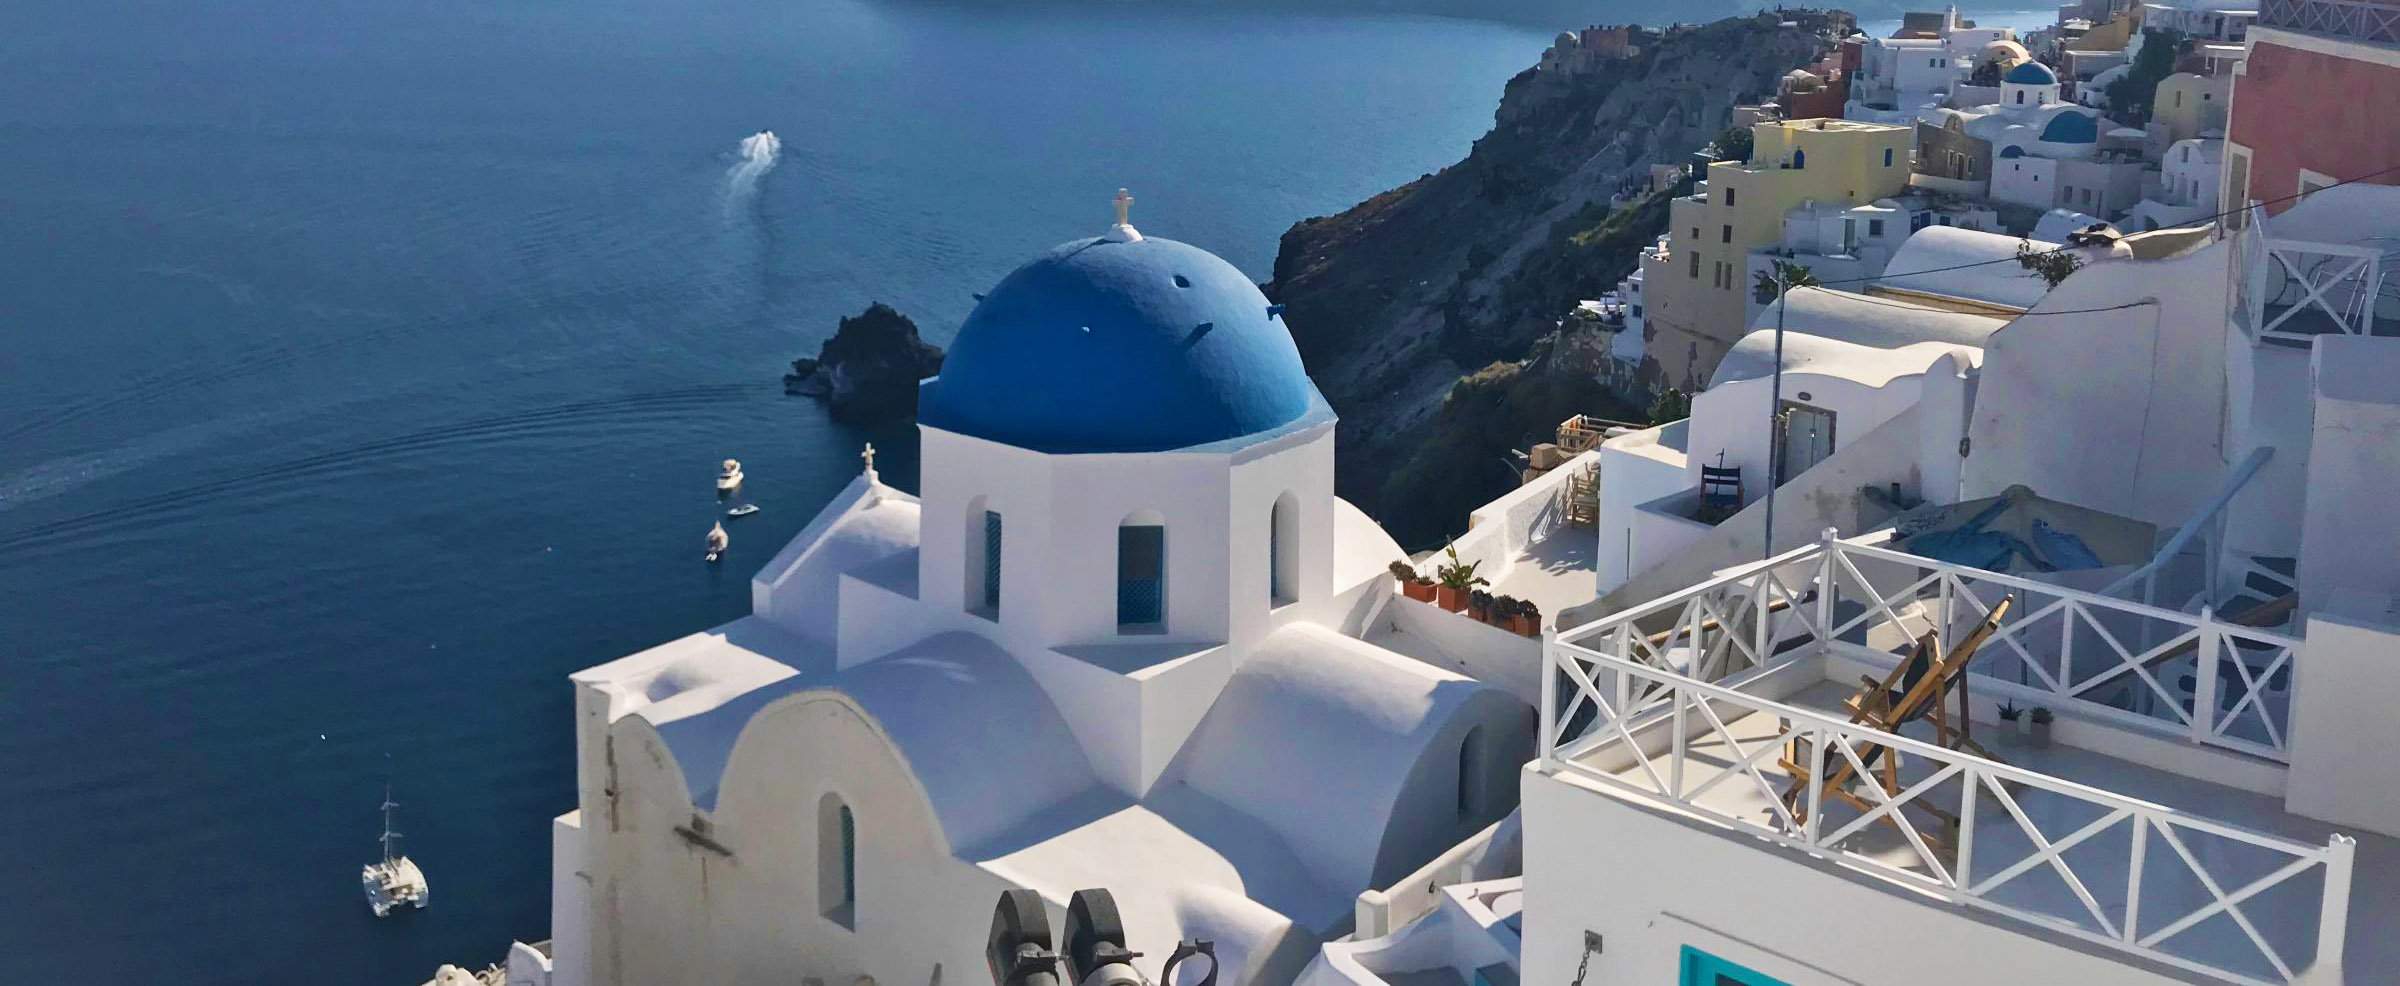 A guide to Santorini – how to plan the perfect trip?